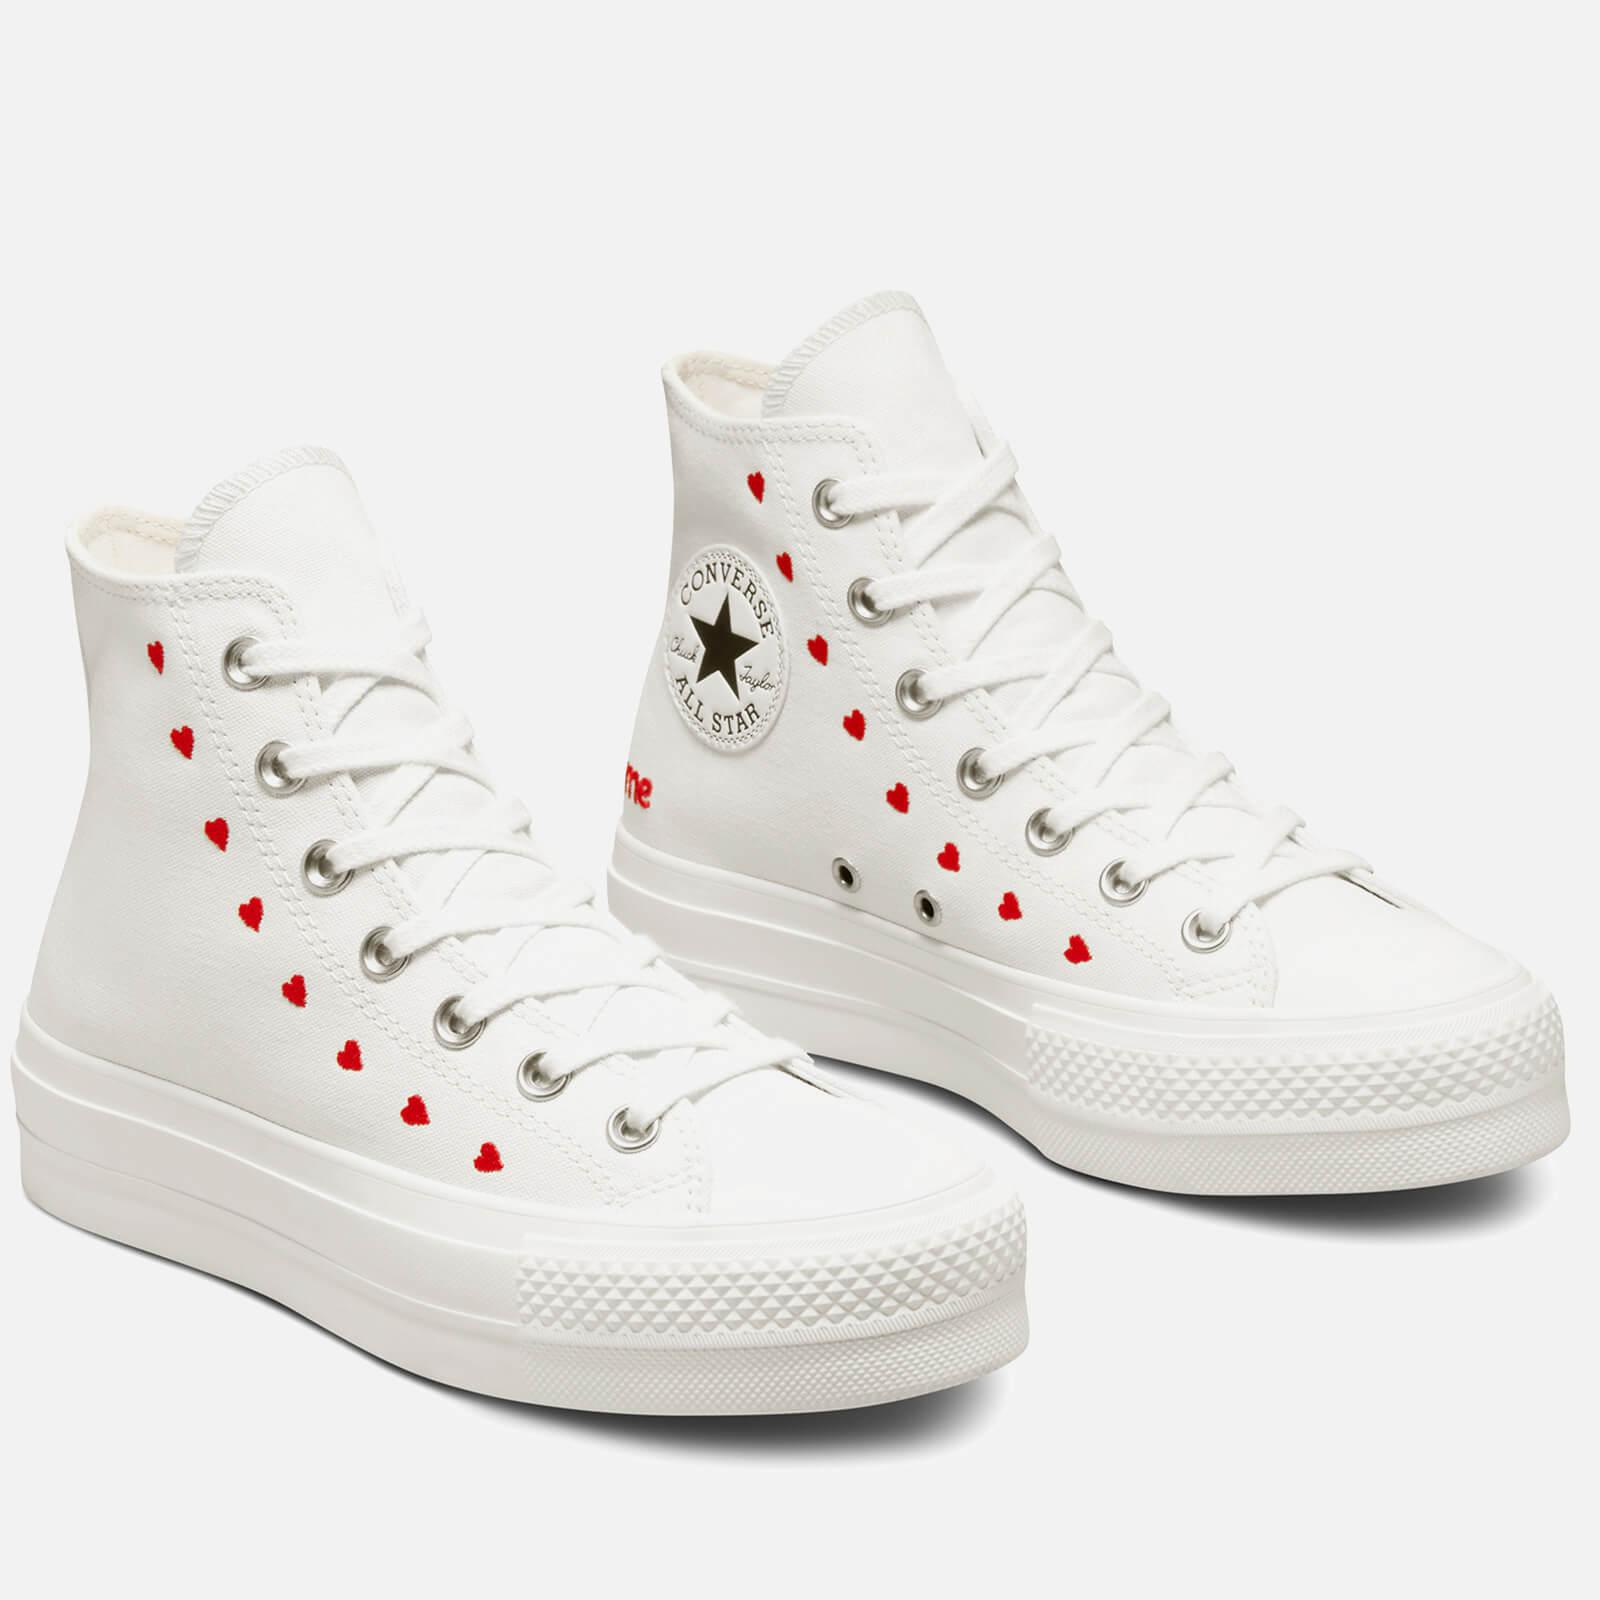 Blueprint Kollega Kristendom Converse Chuck Taylor All Star Crafted With Love Lift Hi-top Trainers in  White | Lyst